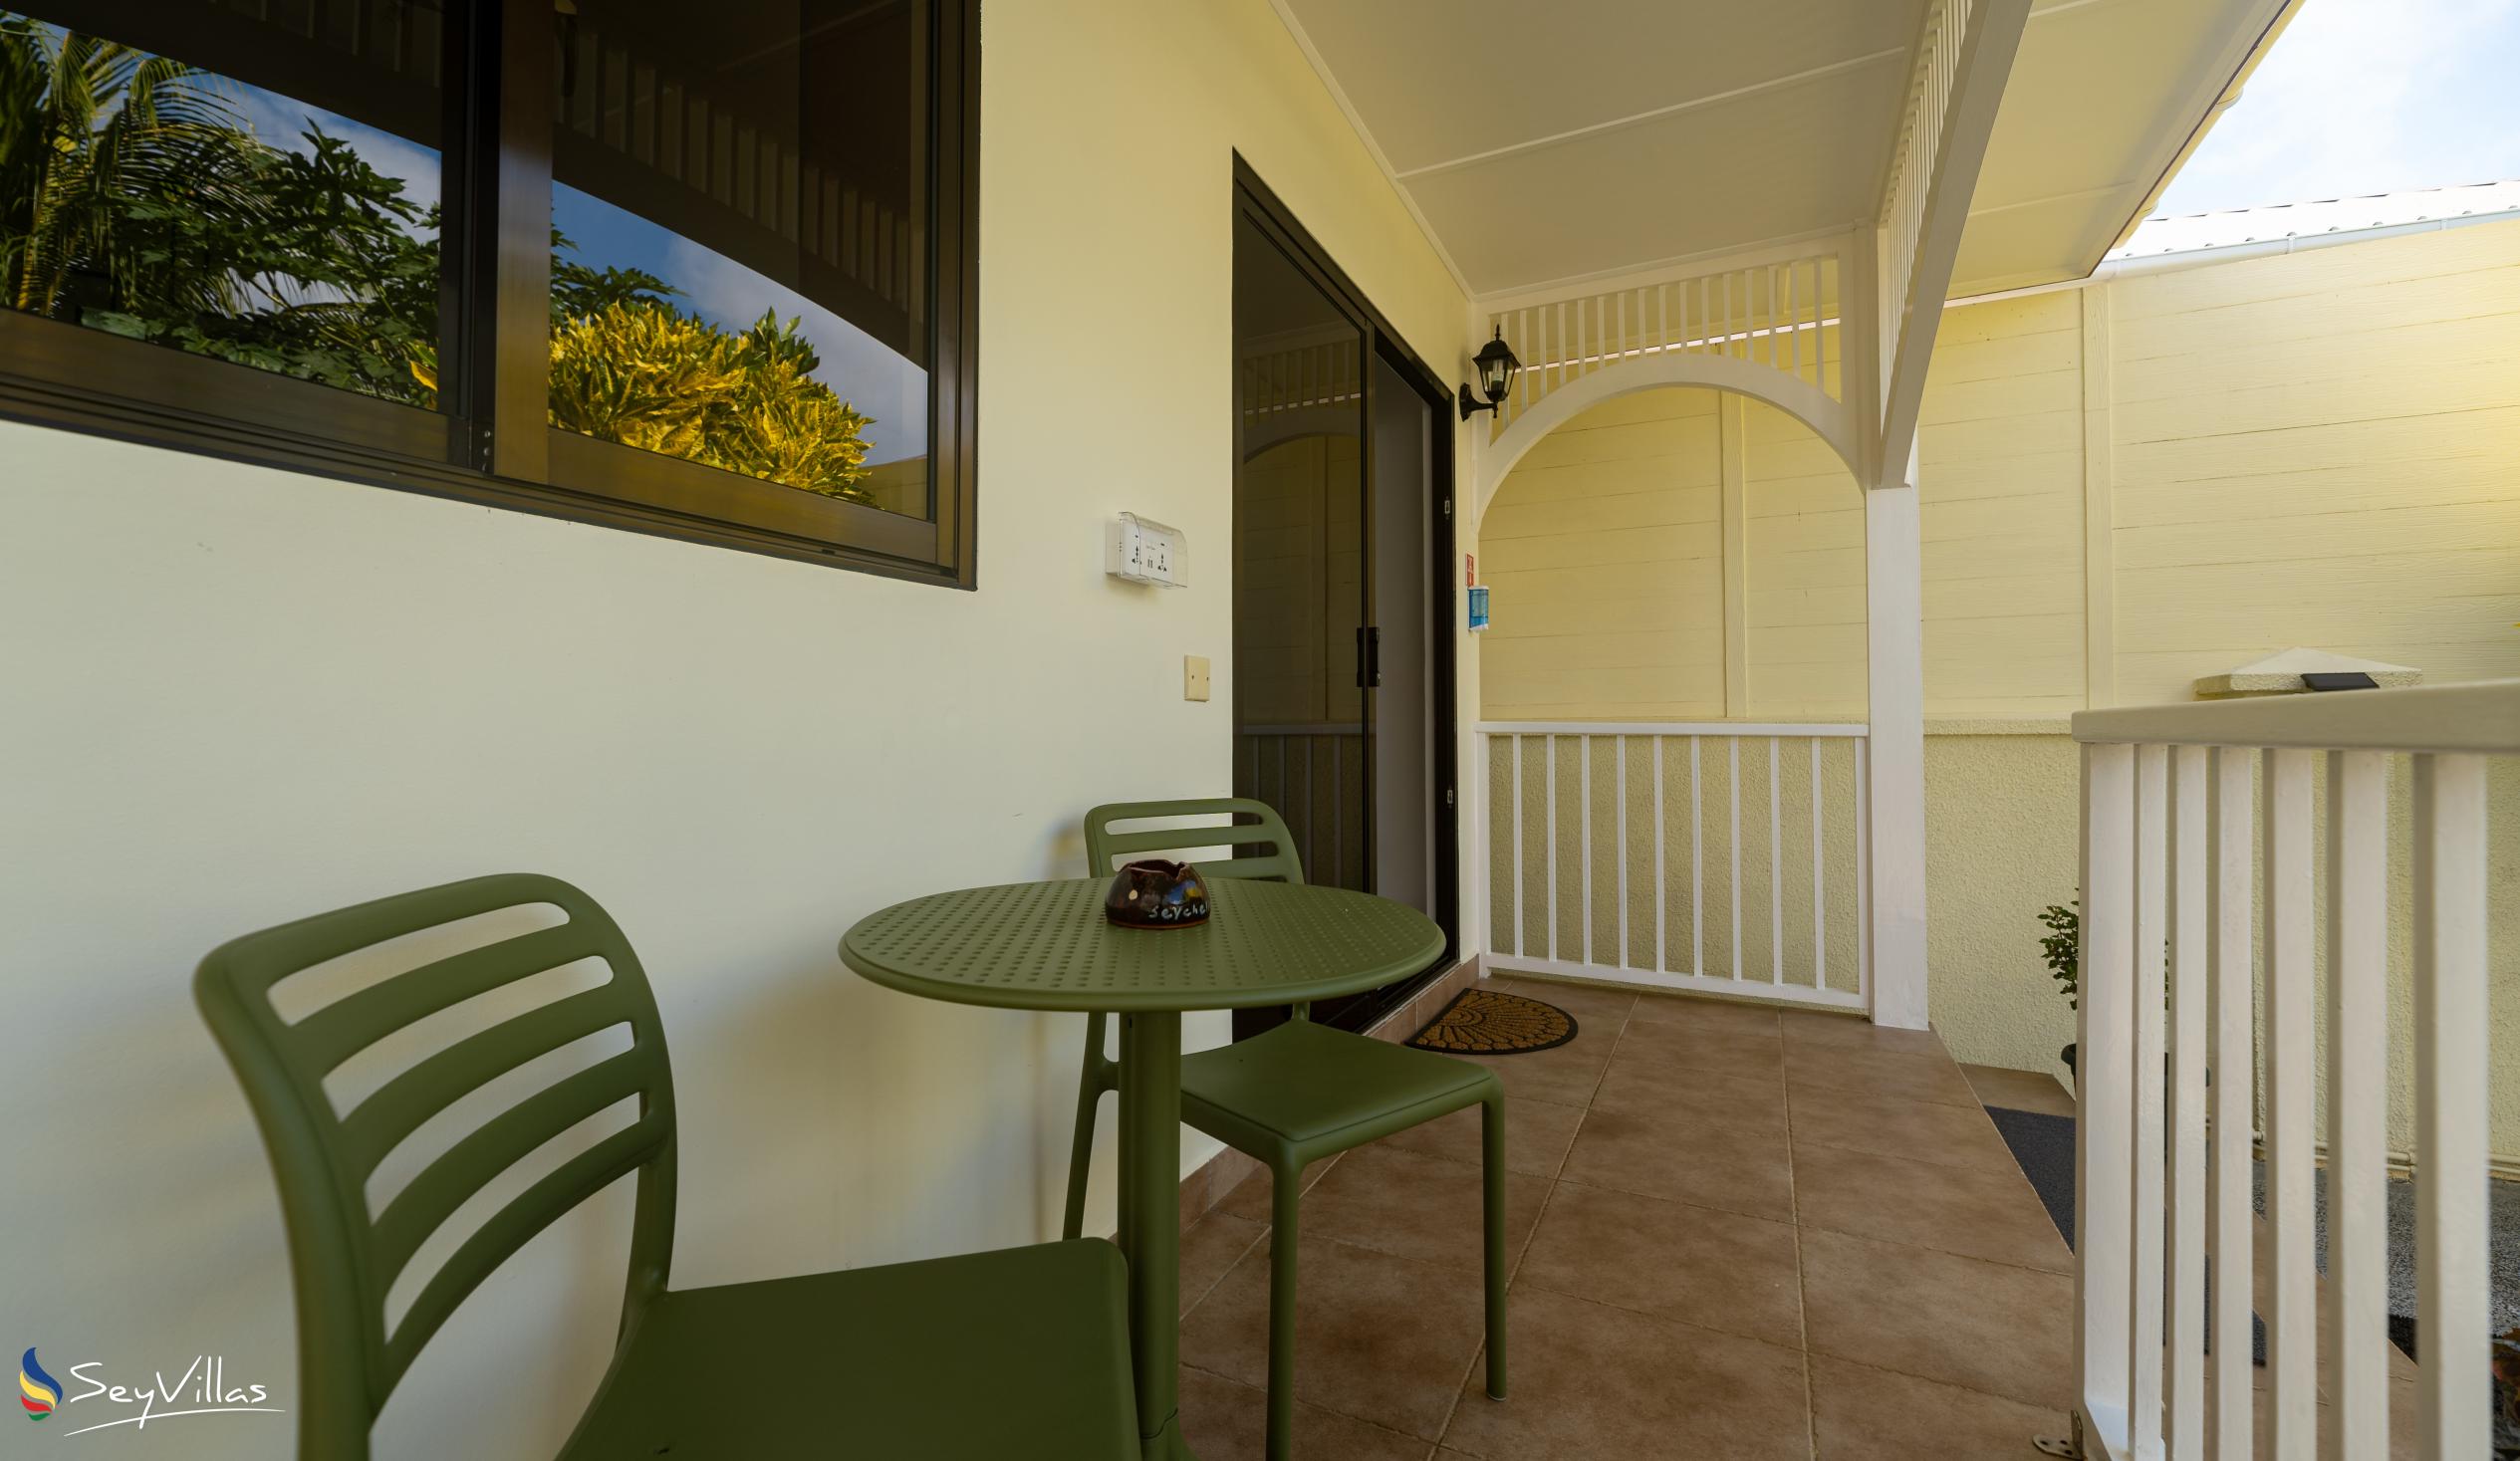 Photo 48: Emma's Guest House and Self-Catering - 1-Bedroom Villa - Mahé (Seychelles)